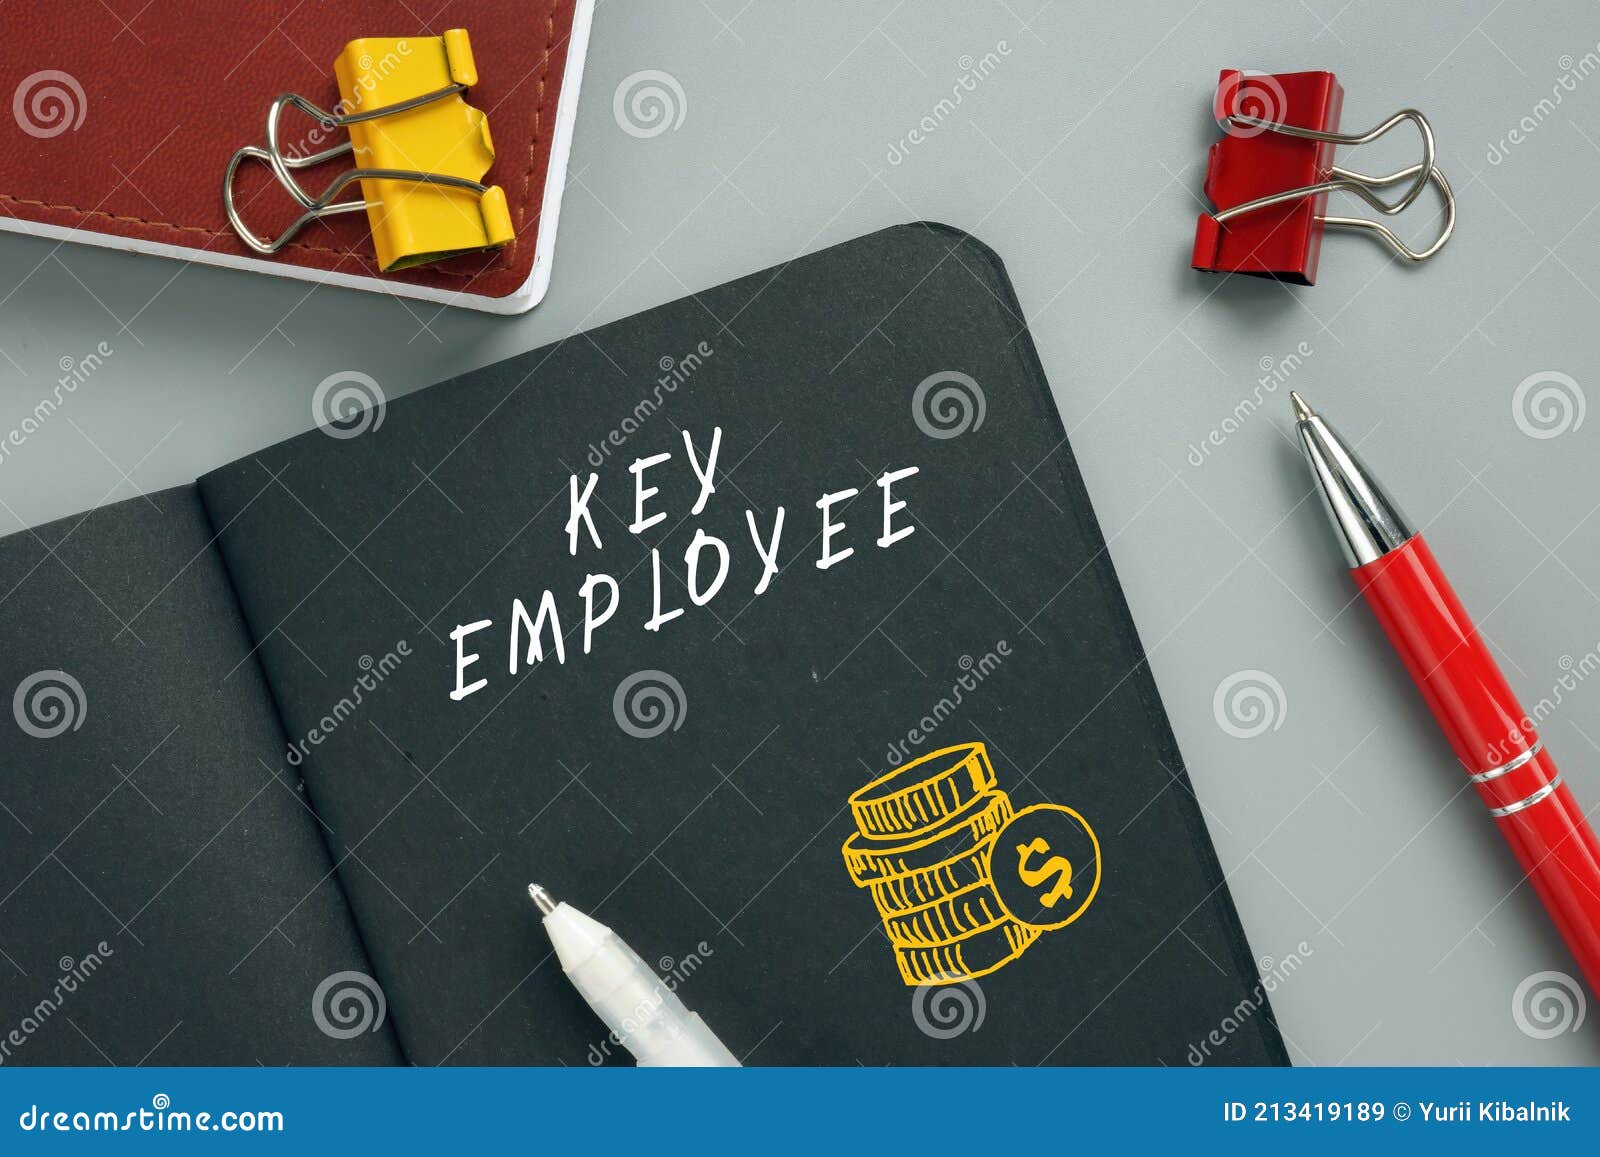 business concept meaning key employee with phrase on the page. aÃÂ key employeeÃÂ is anÃÂ employeeÃÂ with major ownership and/or